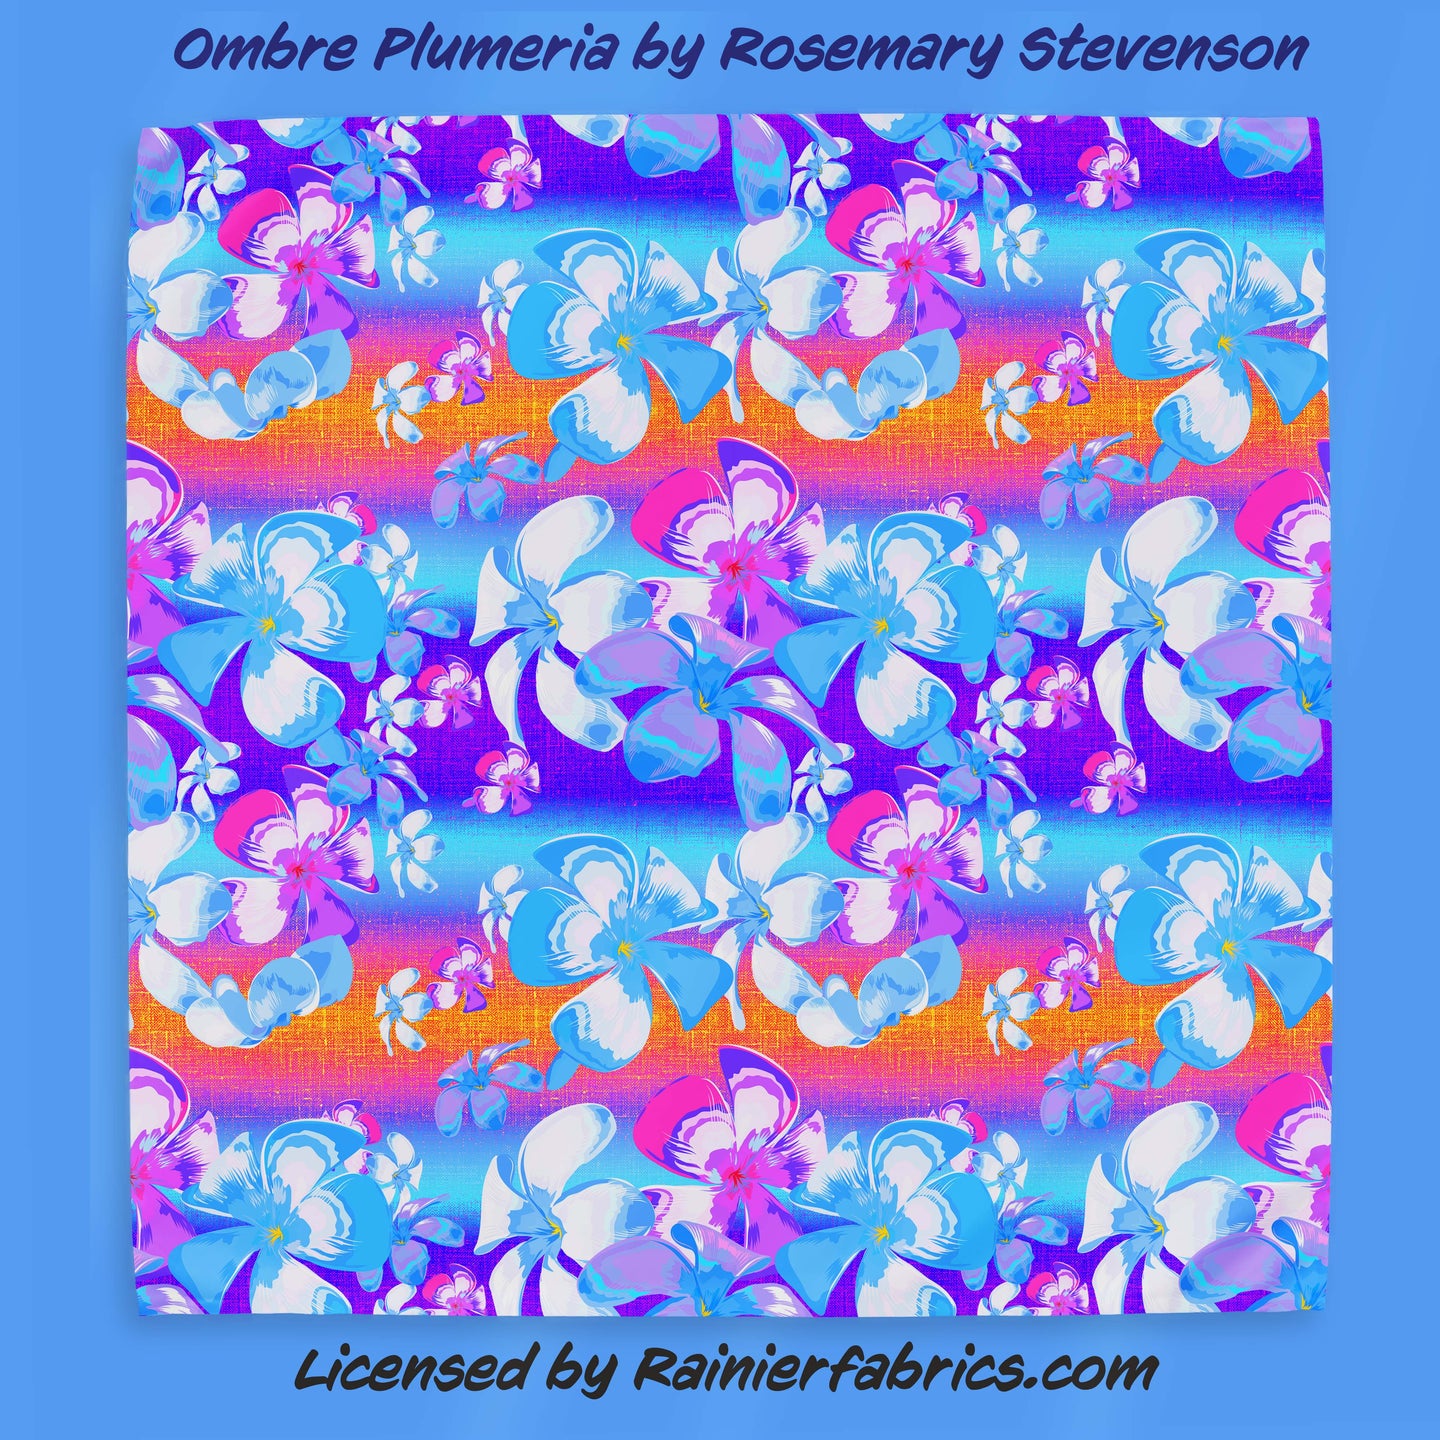 Ombre Plumeria by Rosemary Stevenson - 2-5 day TAT - Order by 1/2 yard; Blankets and towels available too